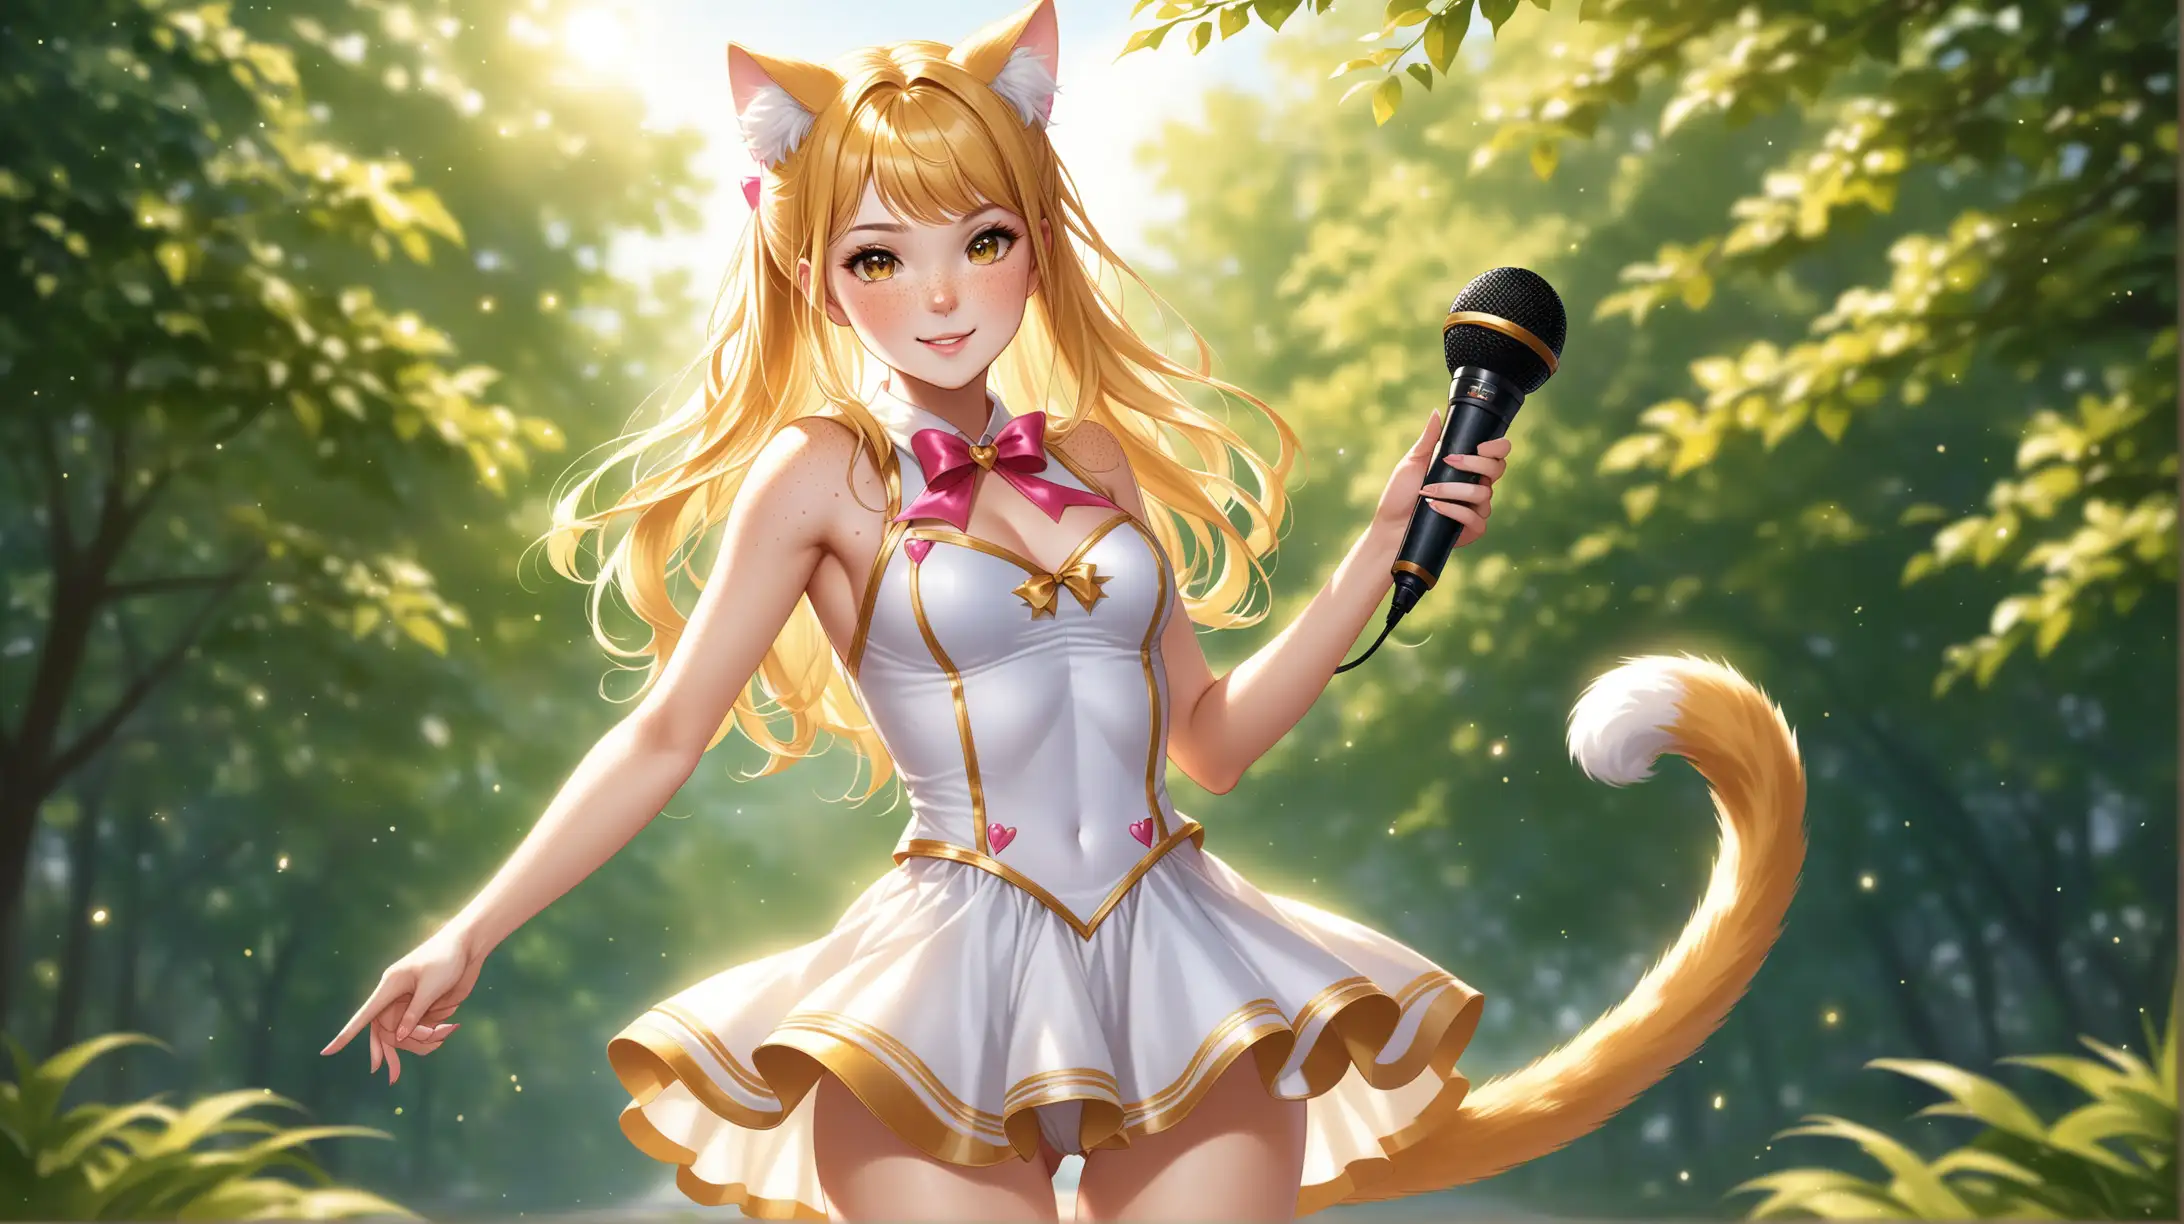 Draw a woman, long blonde hair in a bun, gold eyes, freckles, perky body, high quality, realistic, long shot, full body, outdoors, natural lighting, white magical girl outfit, holding a microphone, cat ears and cat tail, seductive pose, smiling toward the viewer